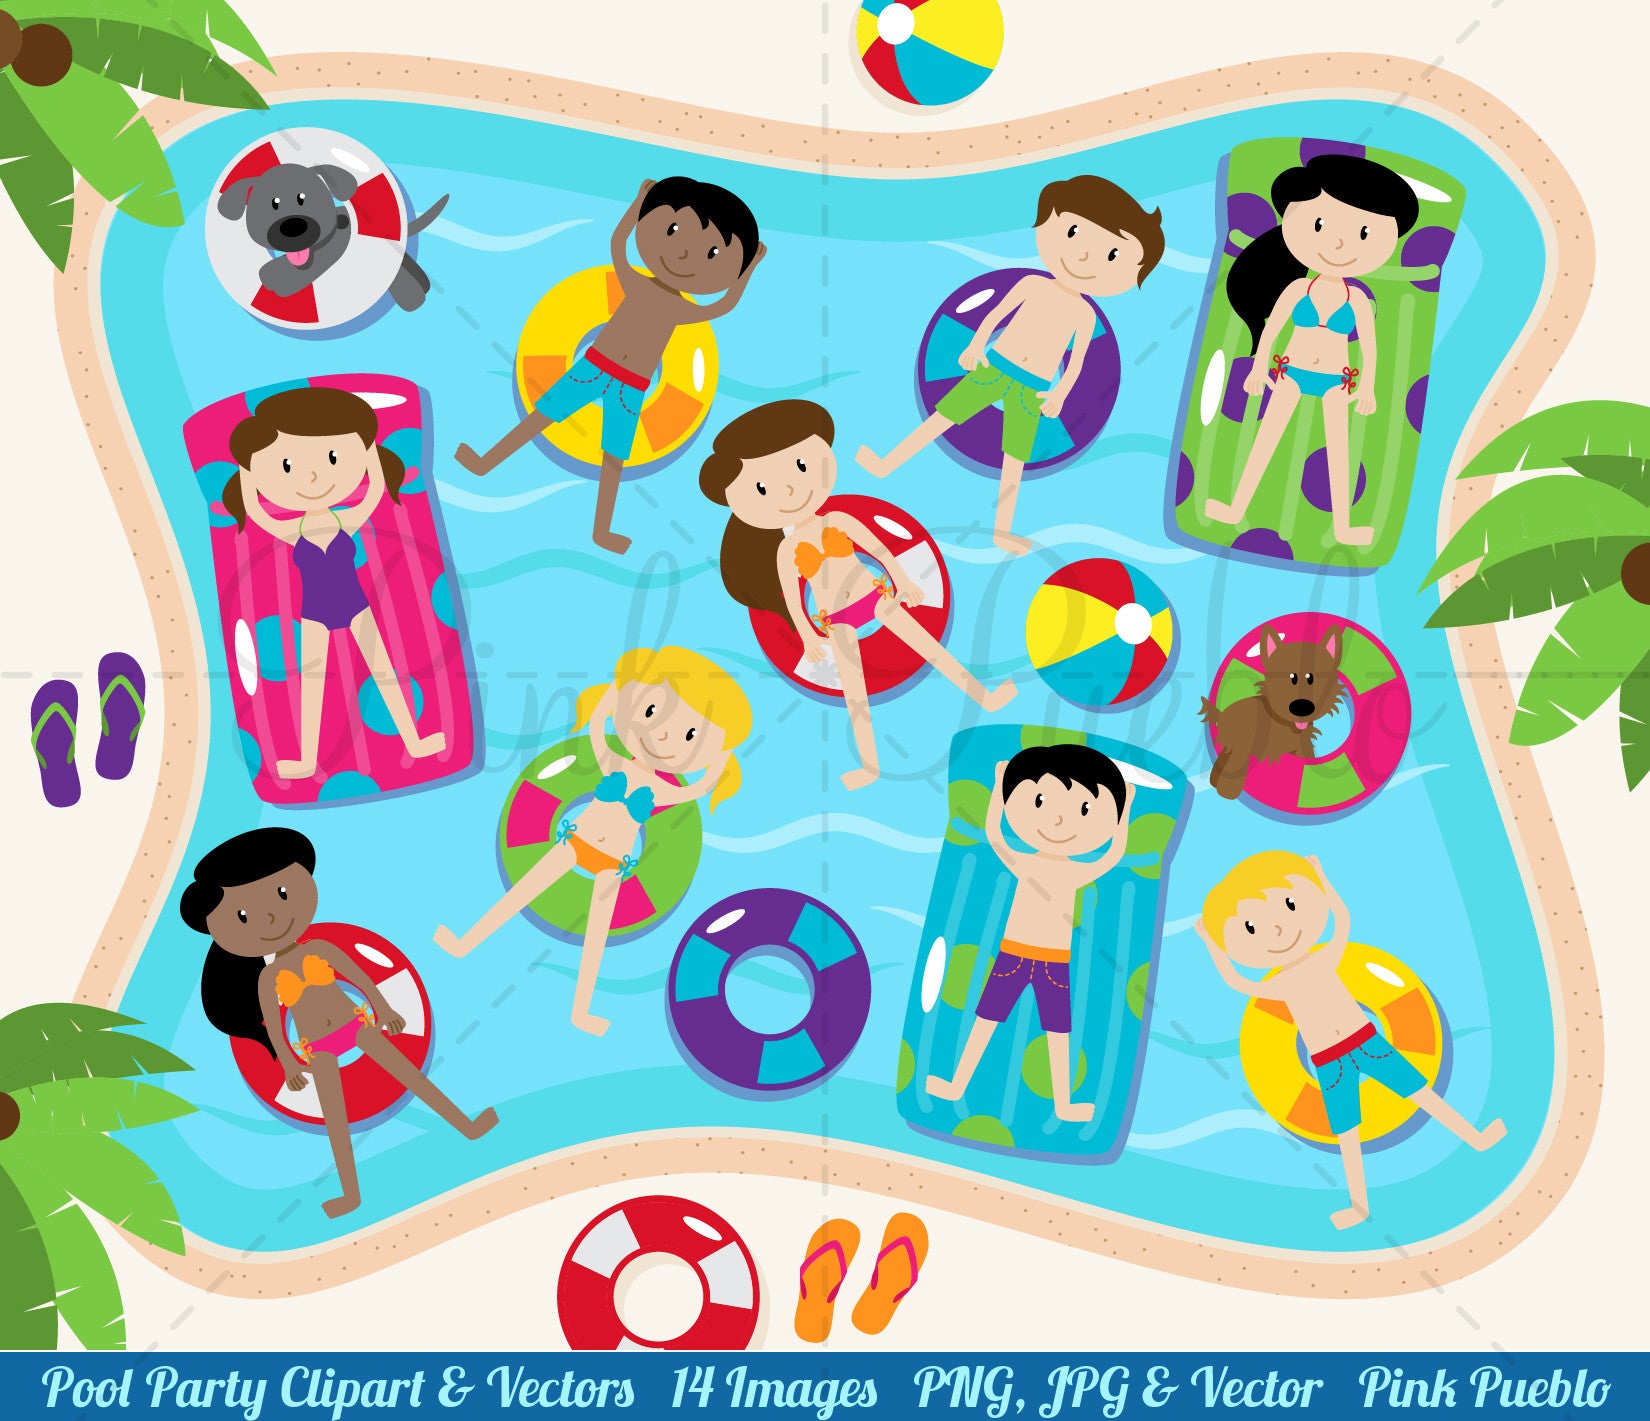 POOL PARTY - 300 dpi PNG